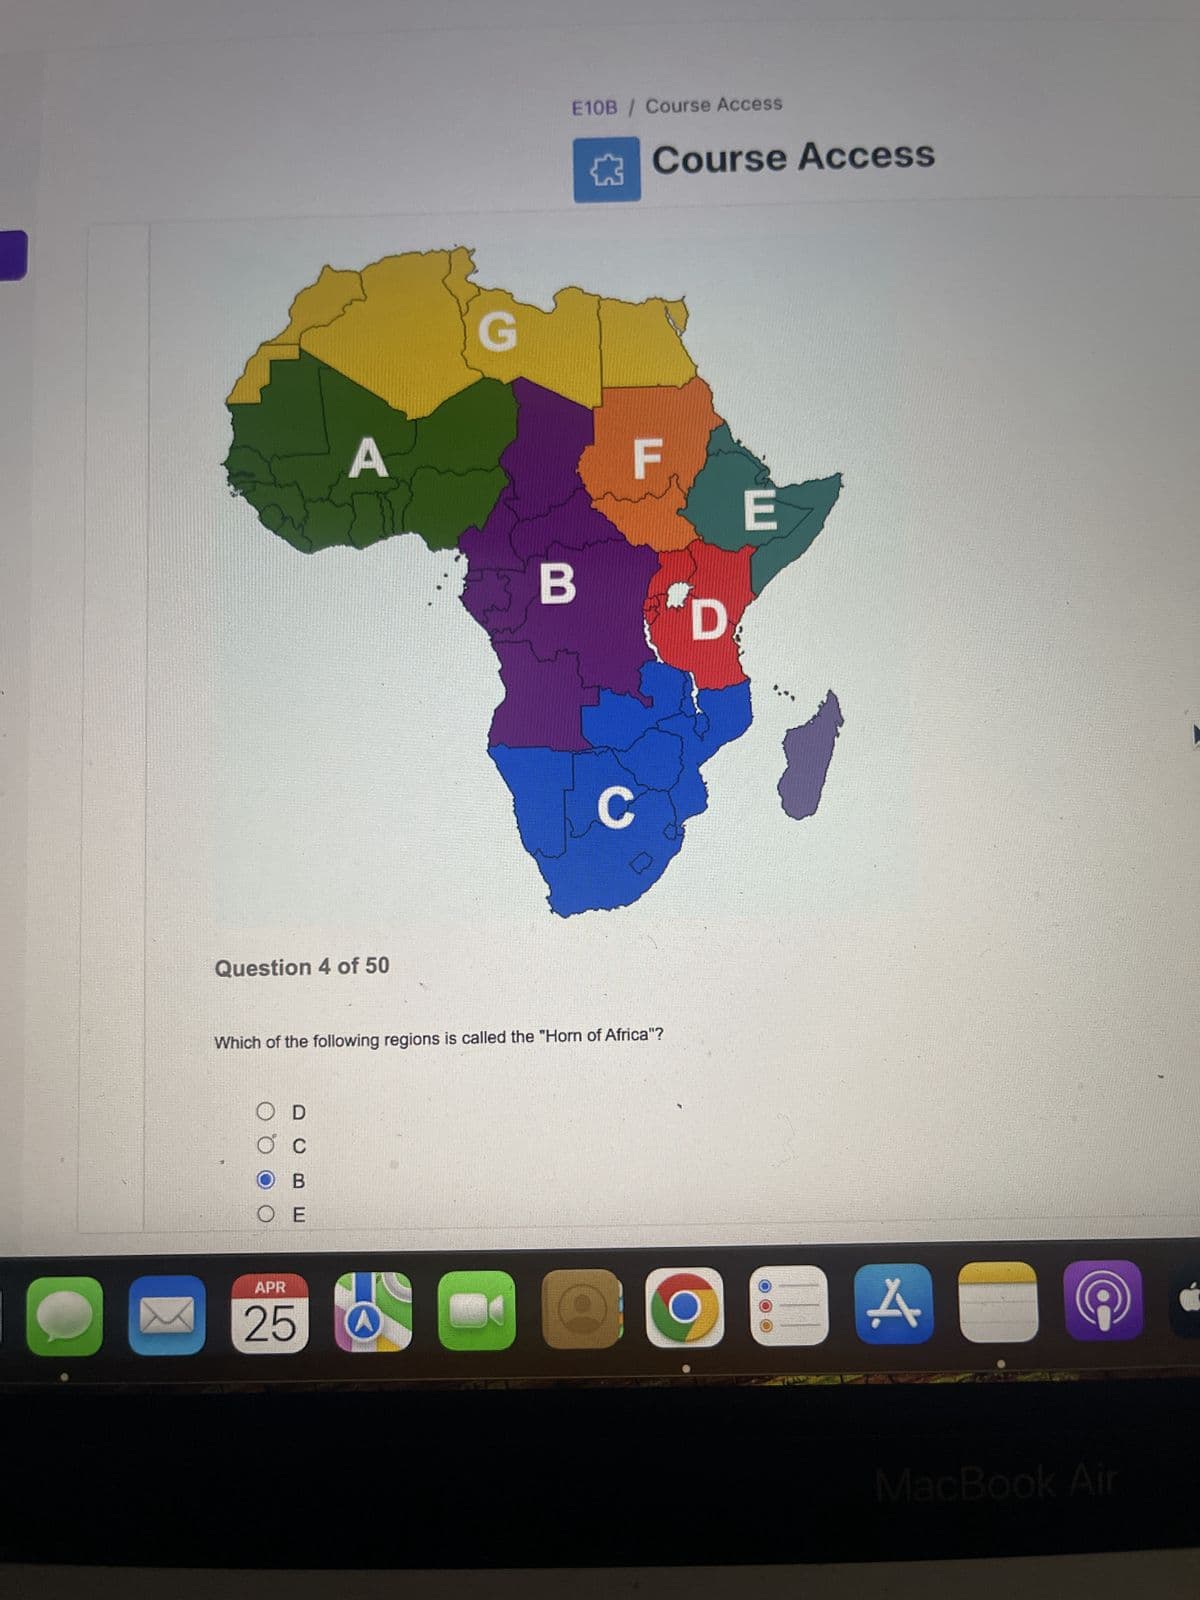 A
Question 4 of 50
E10B / Course Access
Course Access
E
B
D
C
Which of the following regions is called the "Horn of Africa"?
○ D
C
O B
O E
APR
25
A
MacBook Air